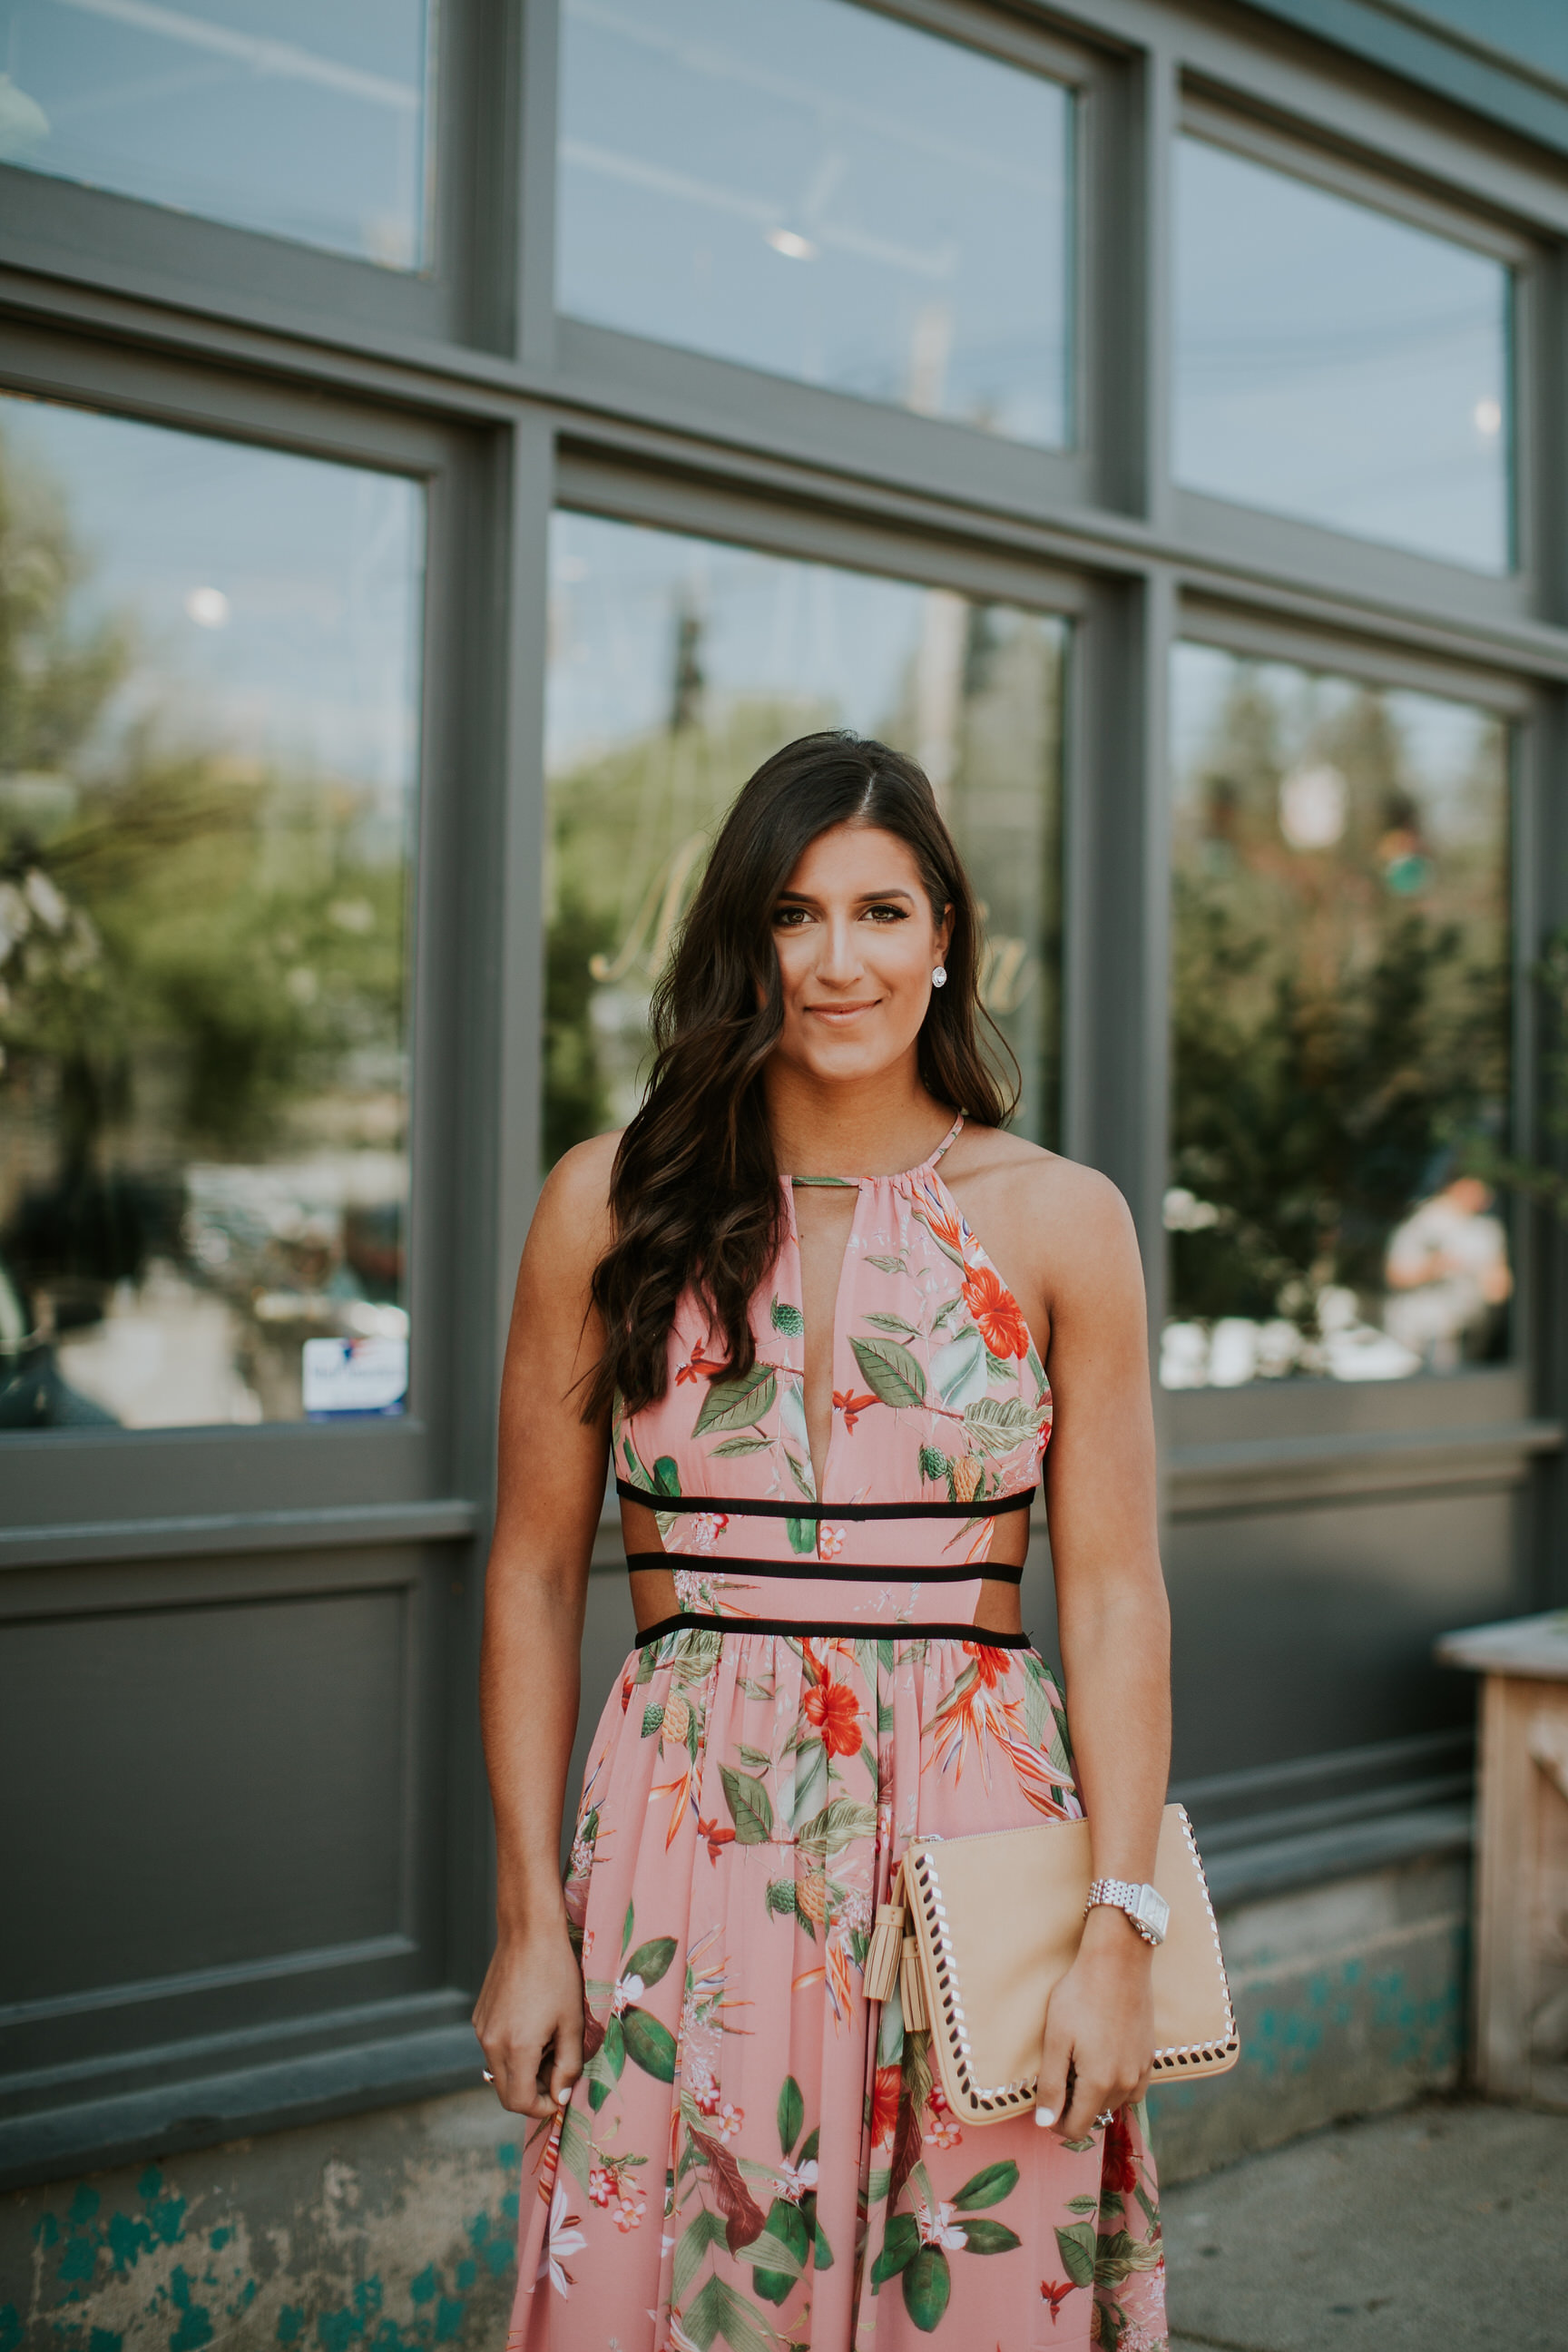 floral maxi dress, express maxi dresses, express sundresses, floral dresses, nude sandals, spring fashion, spring style, spring outfit // grace wainwright a southern drawl